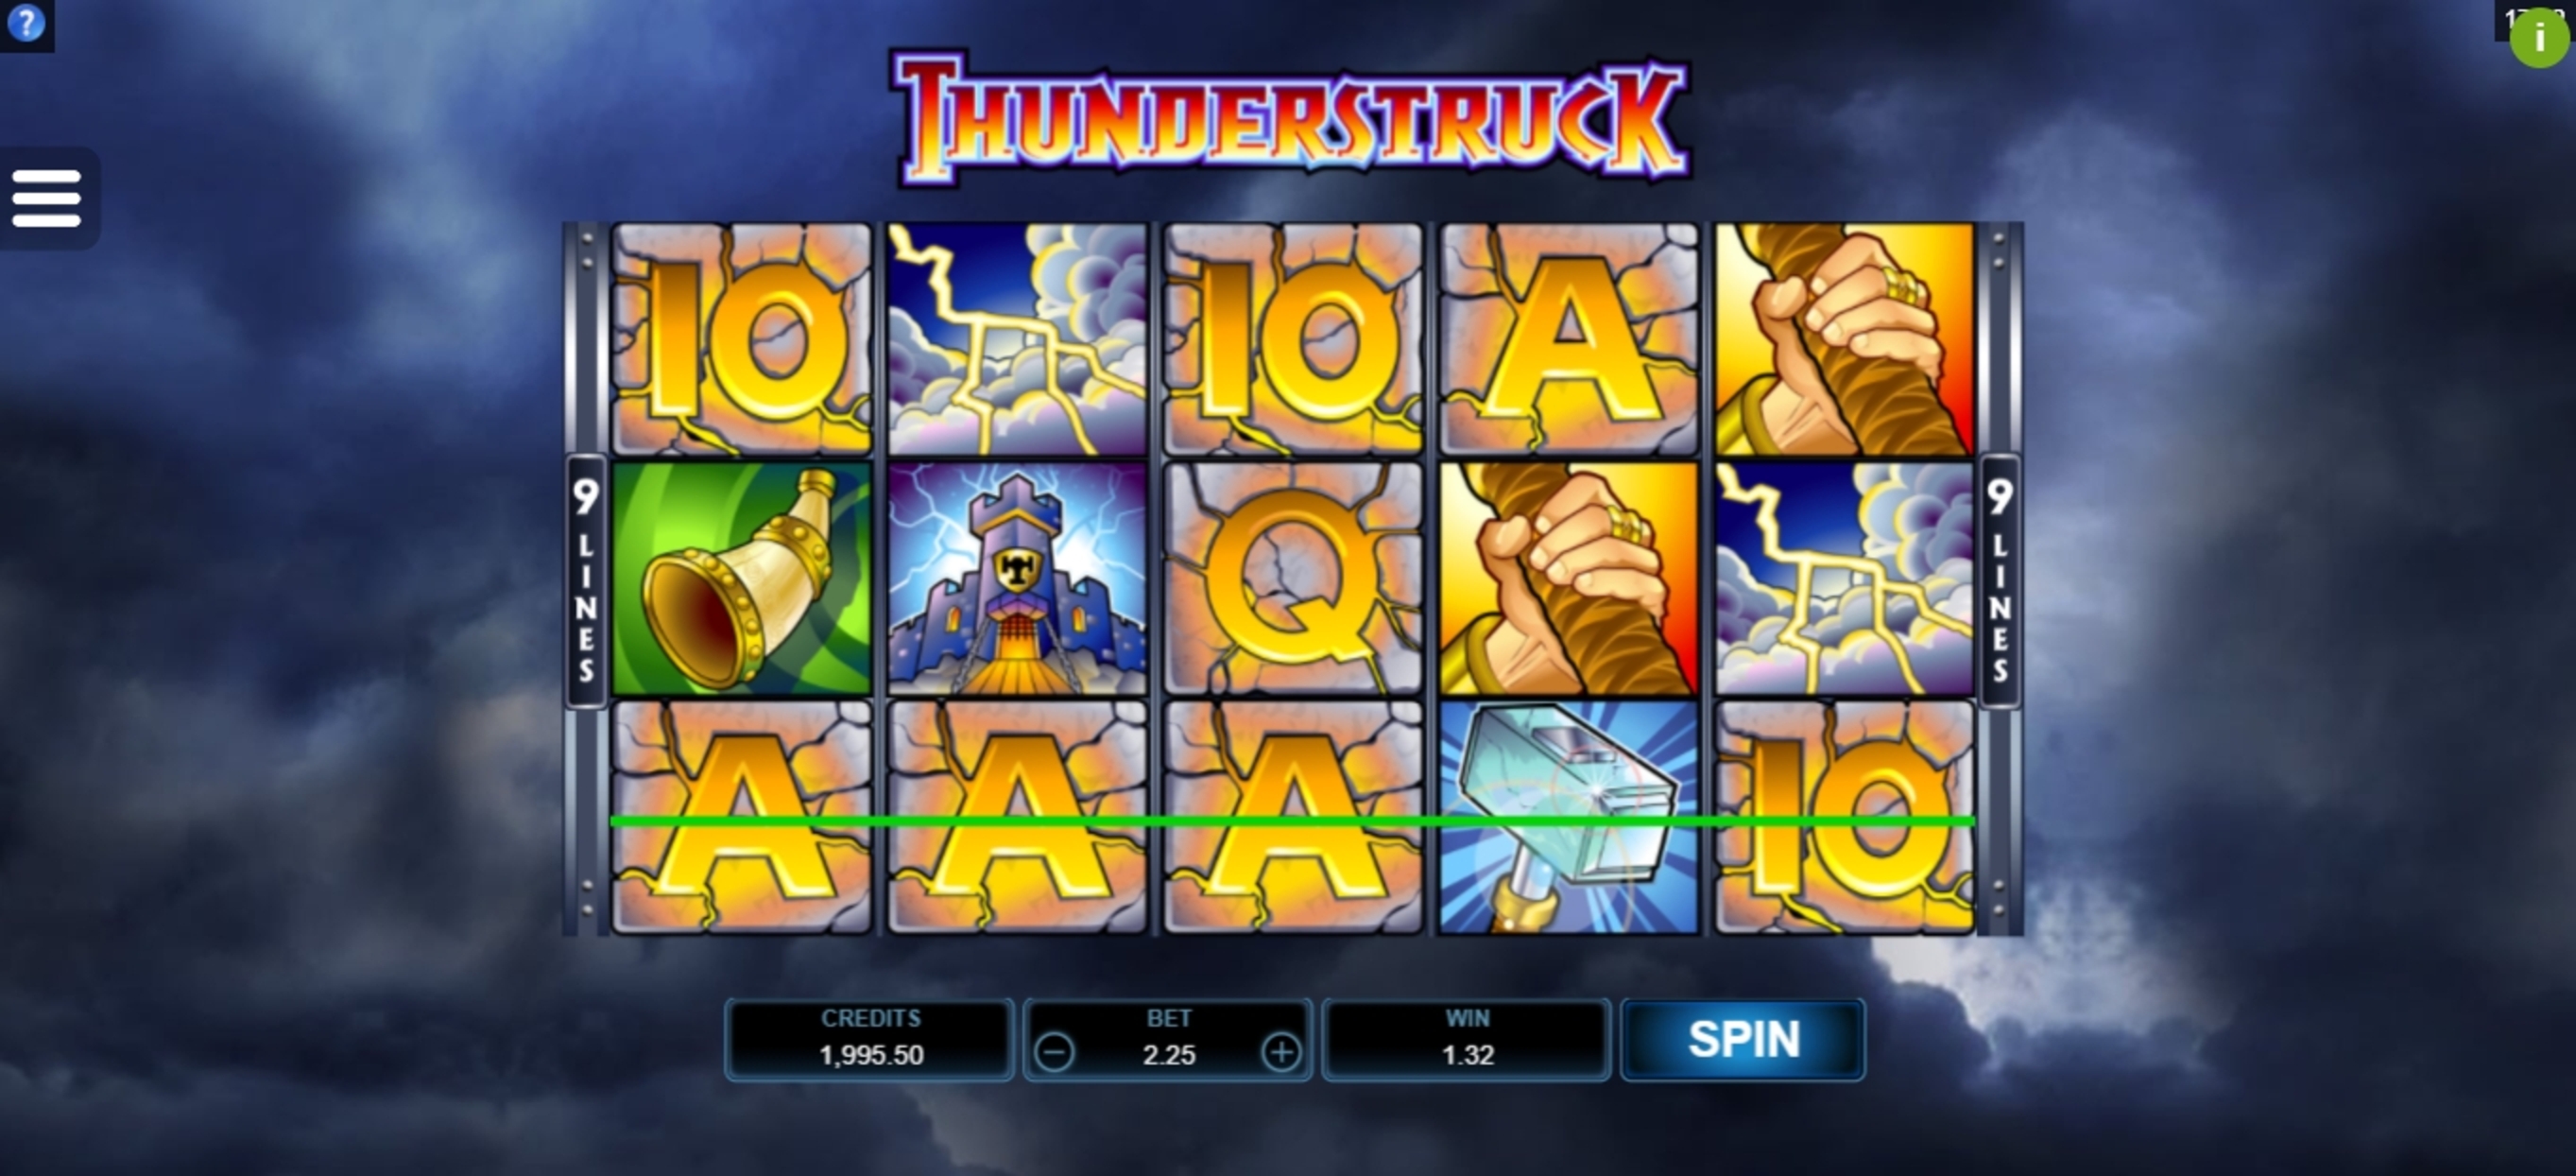 Win Money in Thunderstruck Free Slot Game by Microgaming